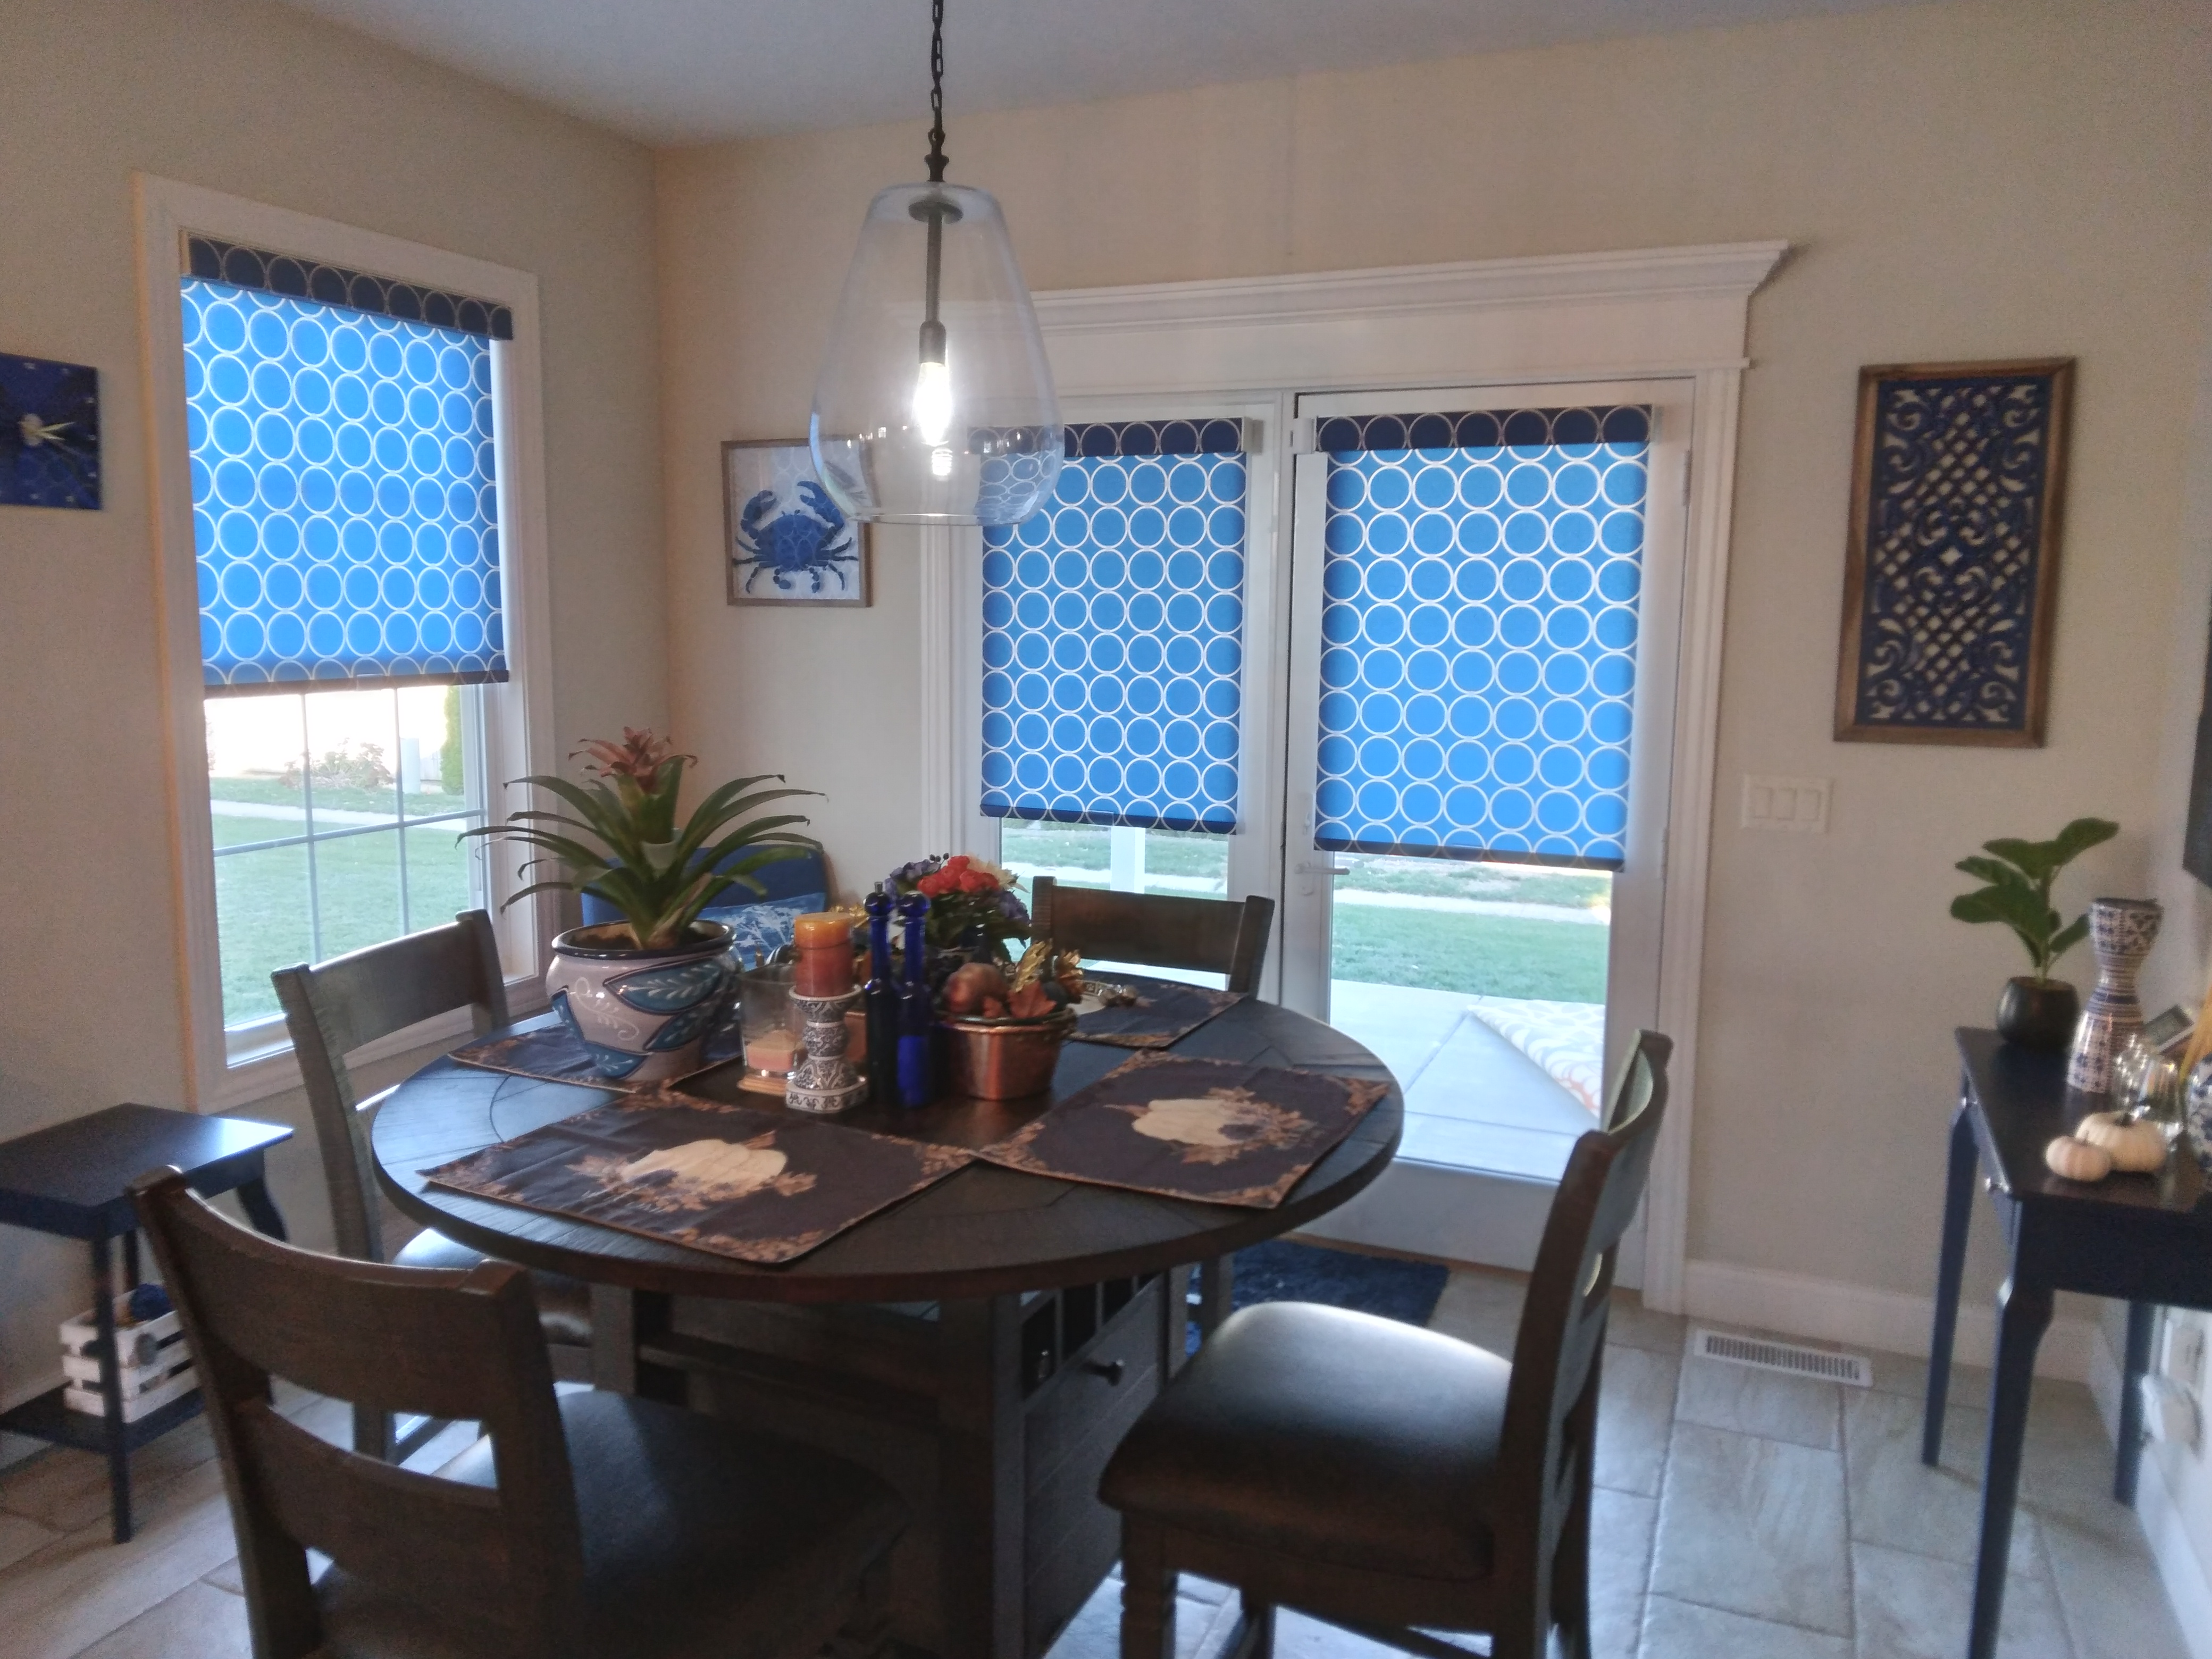 Cordless, light filtering roller shades in Springfield Illinois dining room.  BudgetBlinds  WindowCoverings  Shades  RollerShades  SpringfieldIllinois